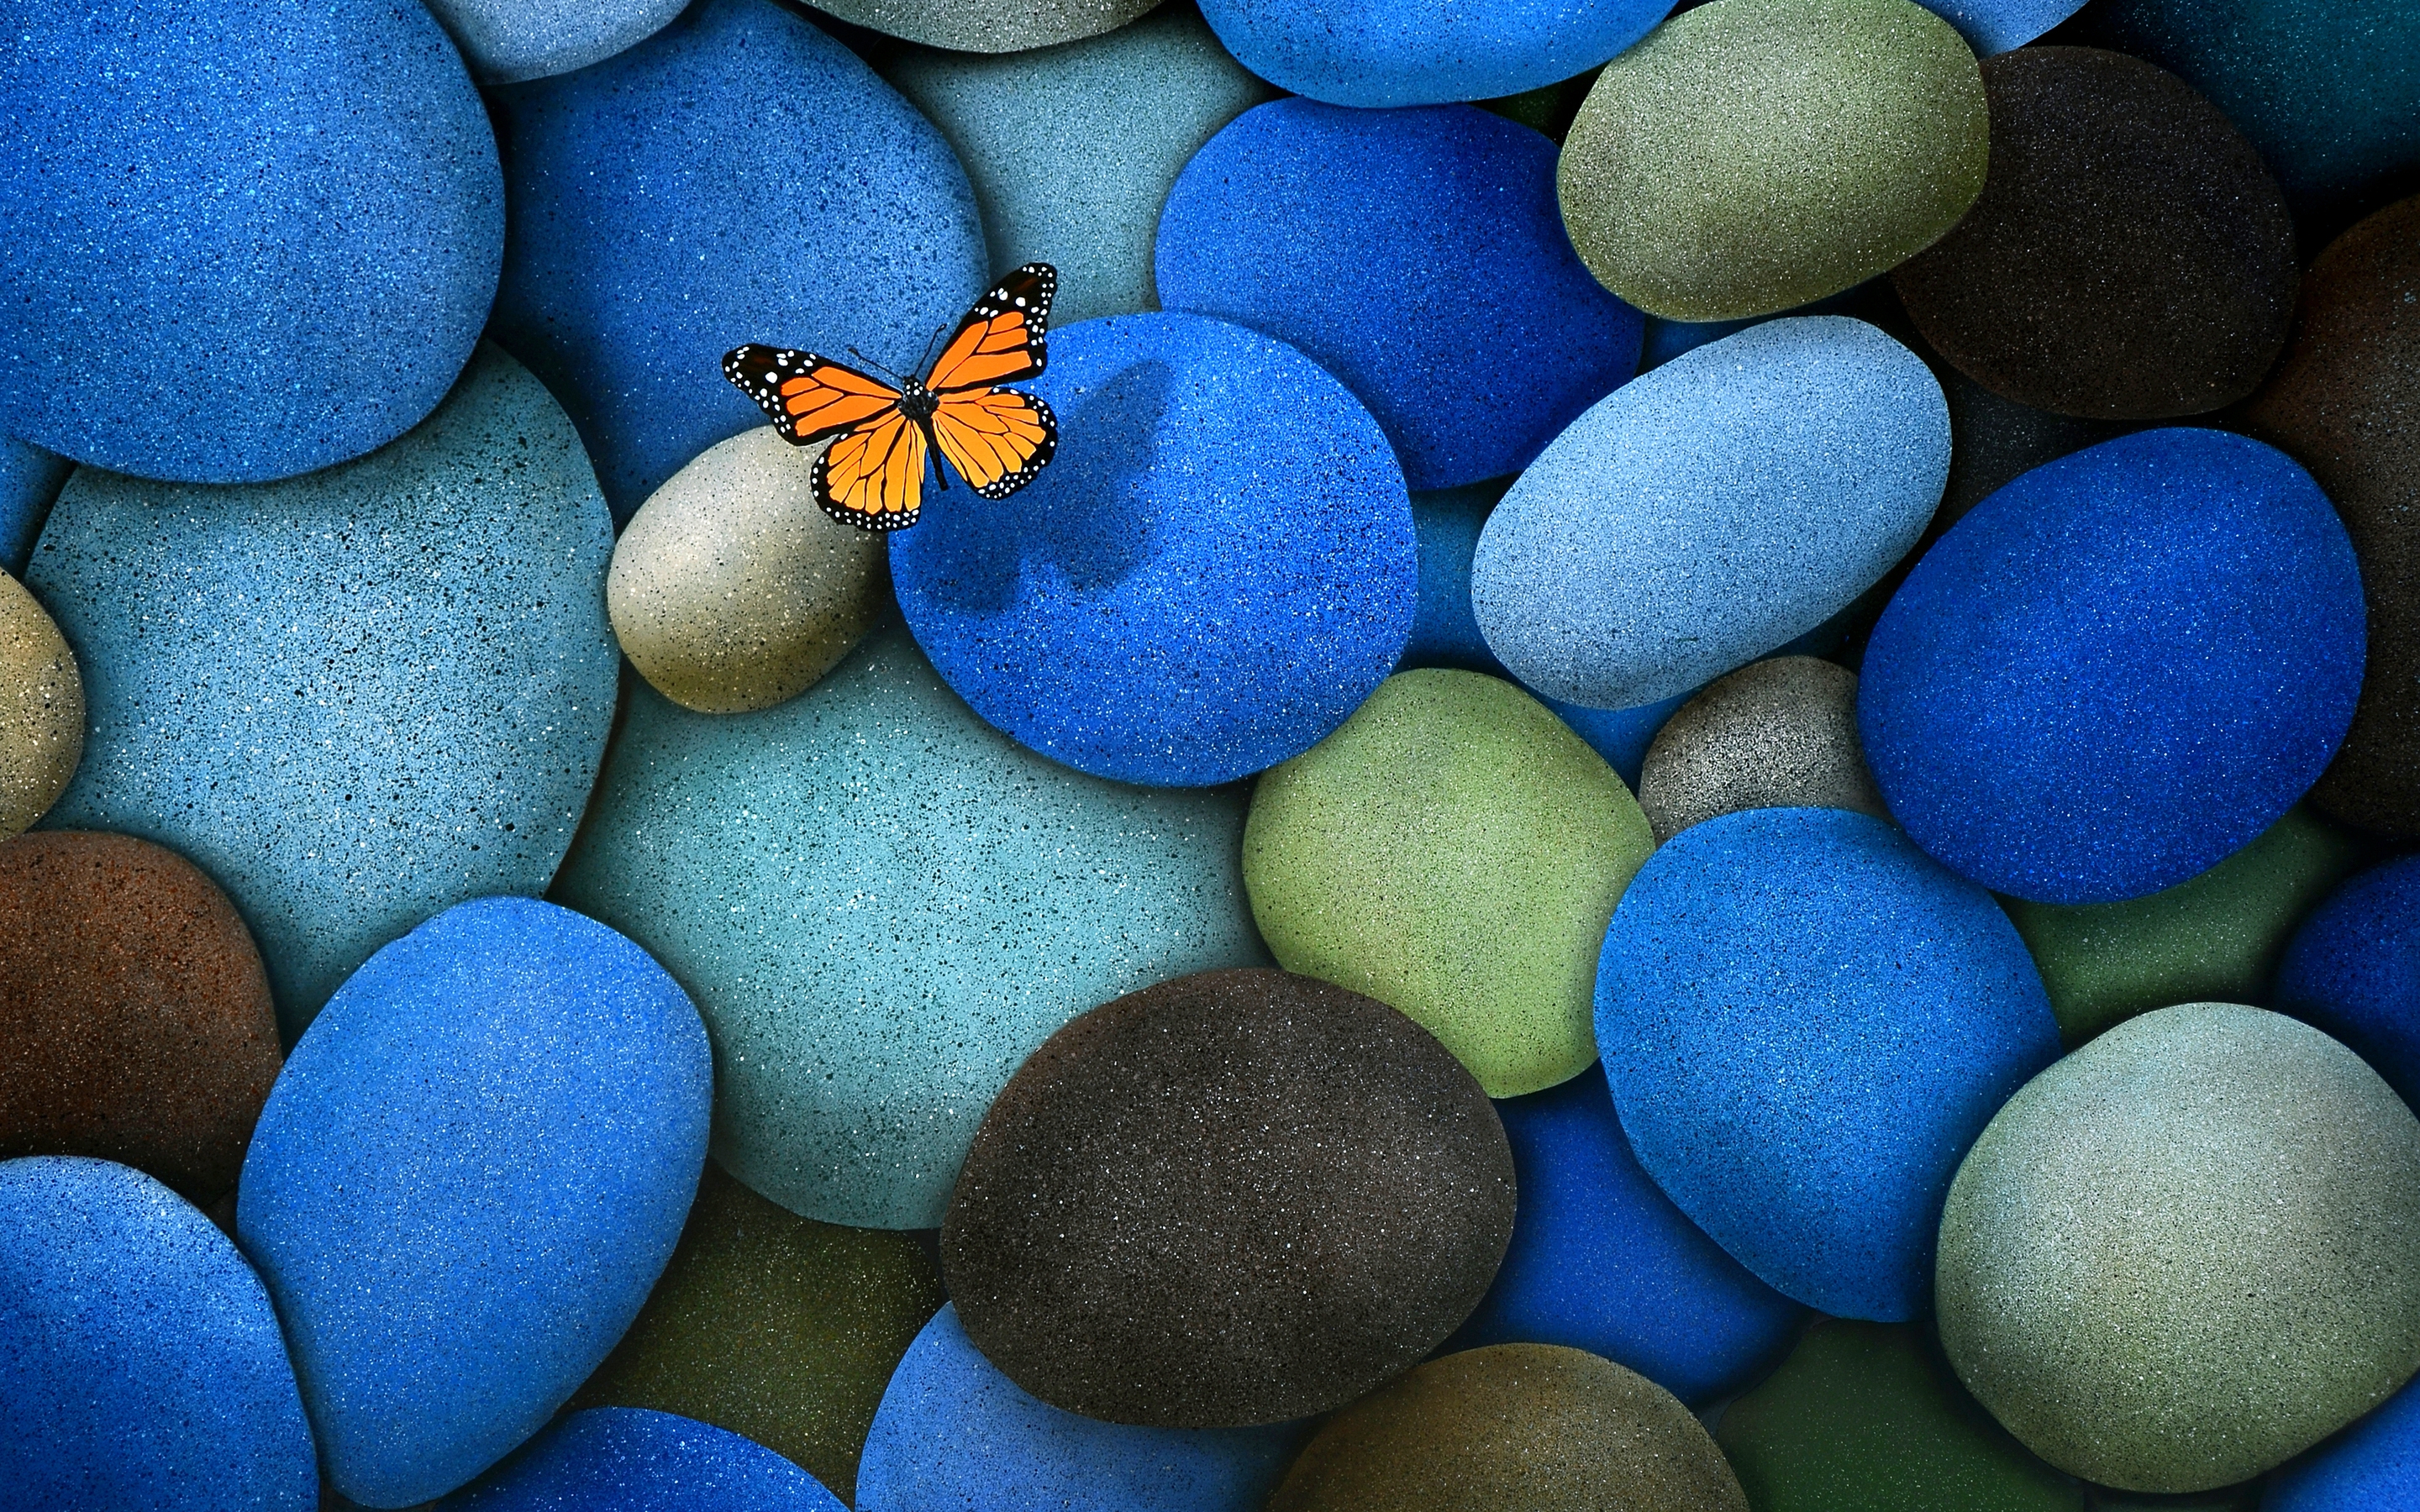 Lonely Butterfly for 2880 x 1800 Retina Display resolution